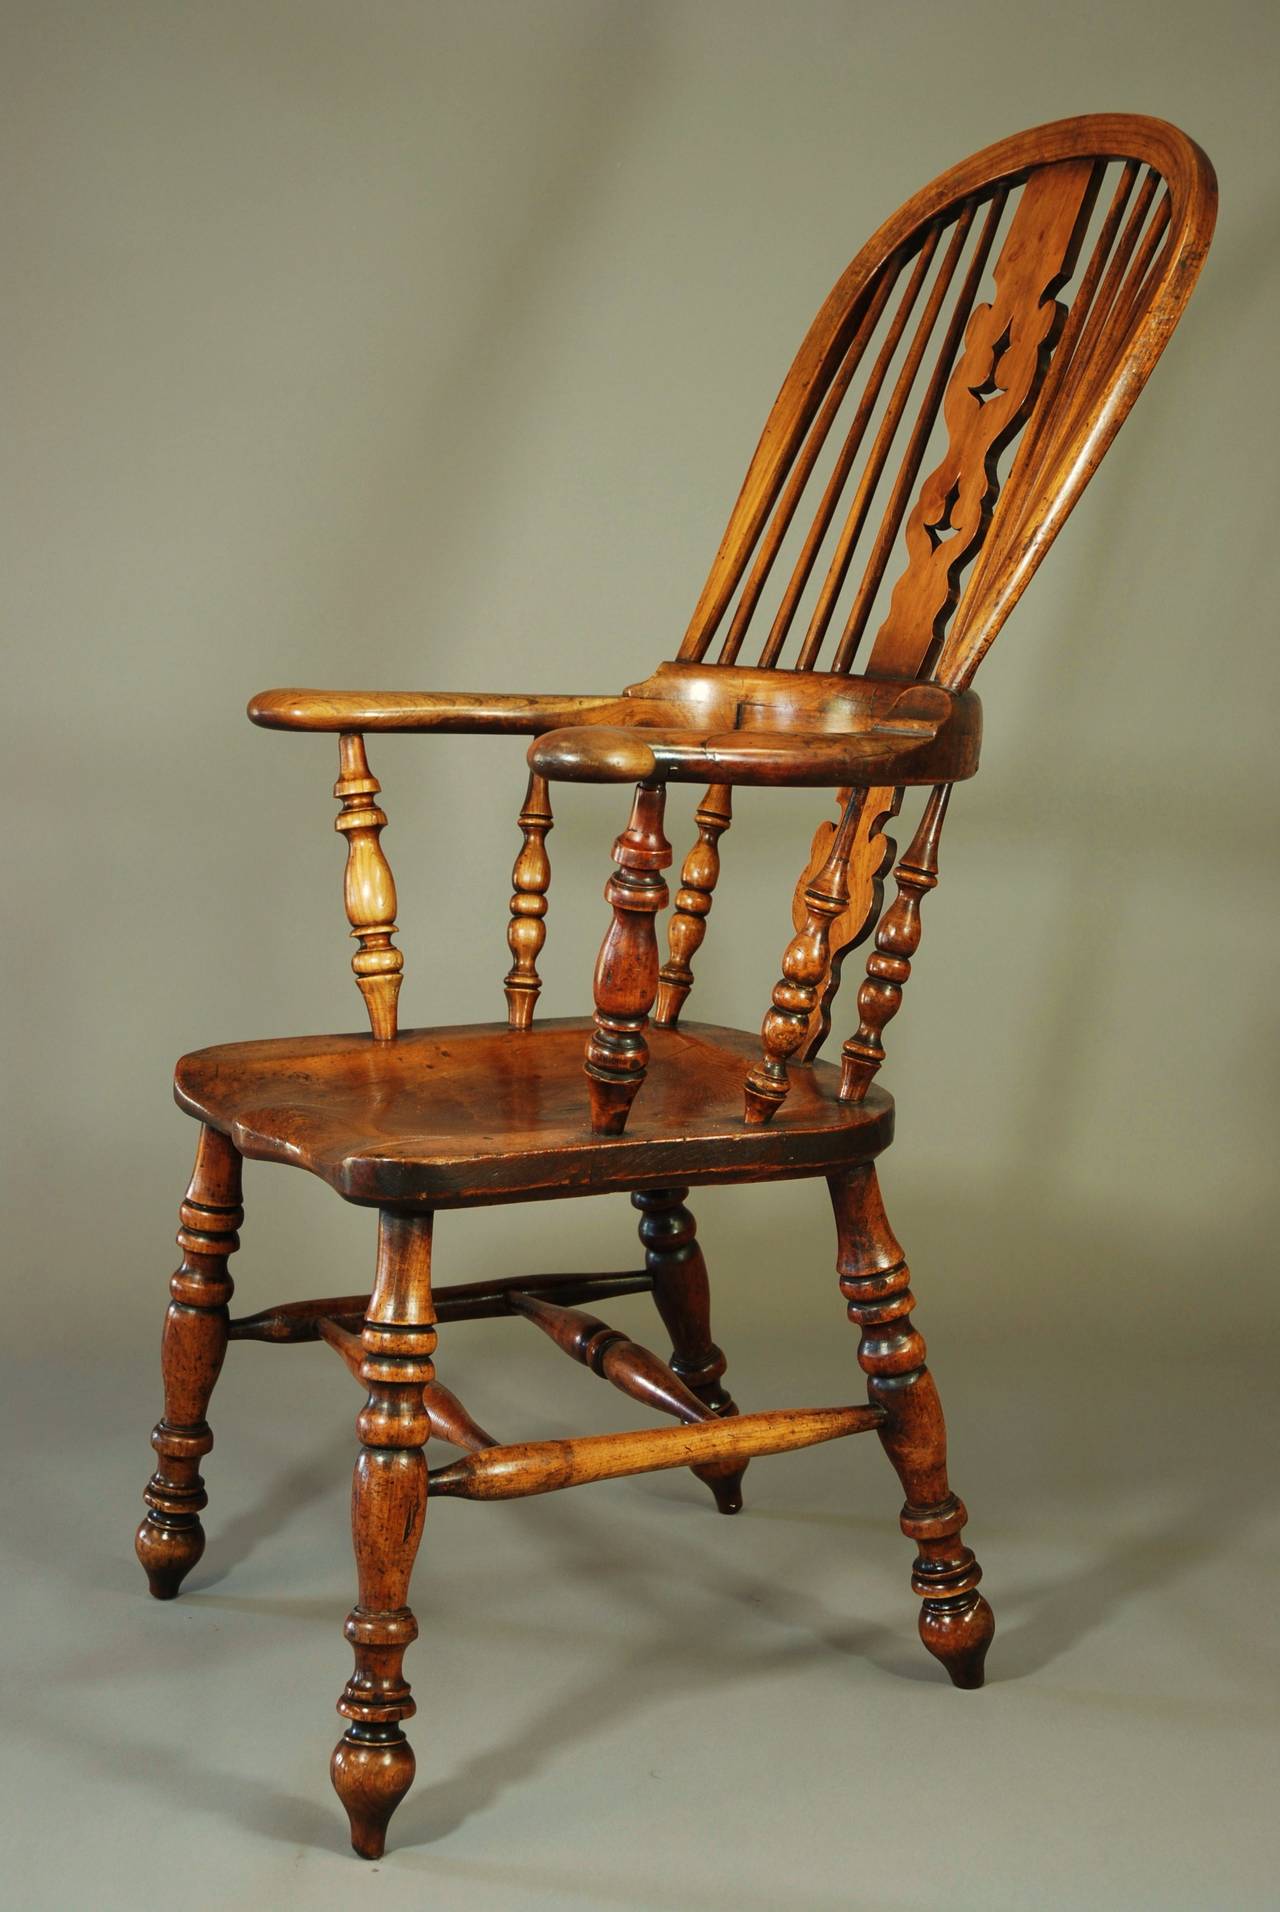 British Broad-Armed Fruitwood High Back Windsor Chair